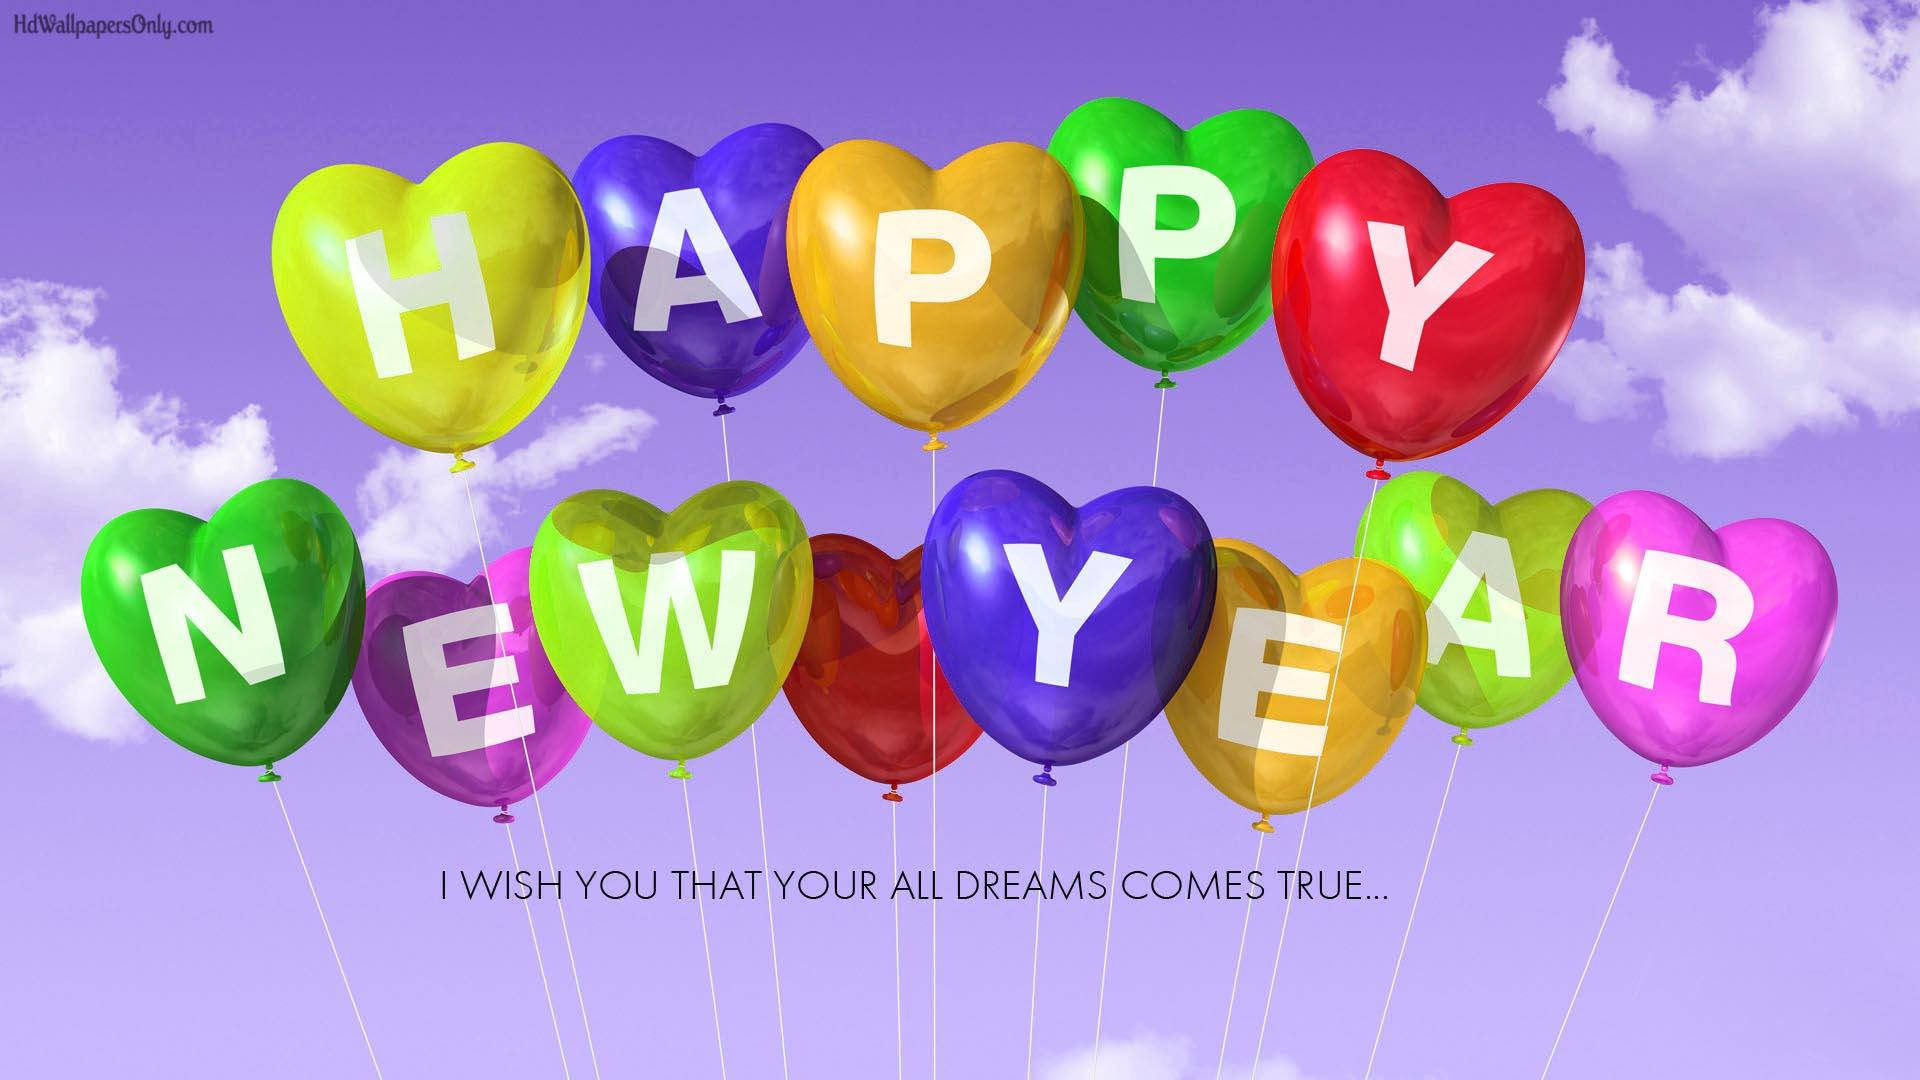 Caption: Celebrate Love And Fresh Beginnings With Cute Happy New Year 2021 Heart Balloons Background